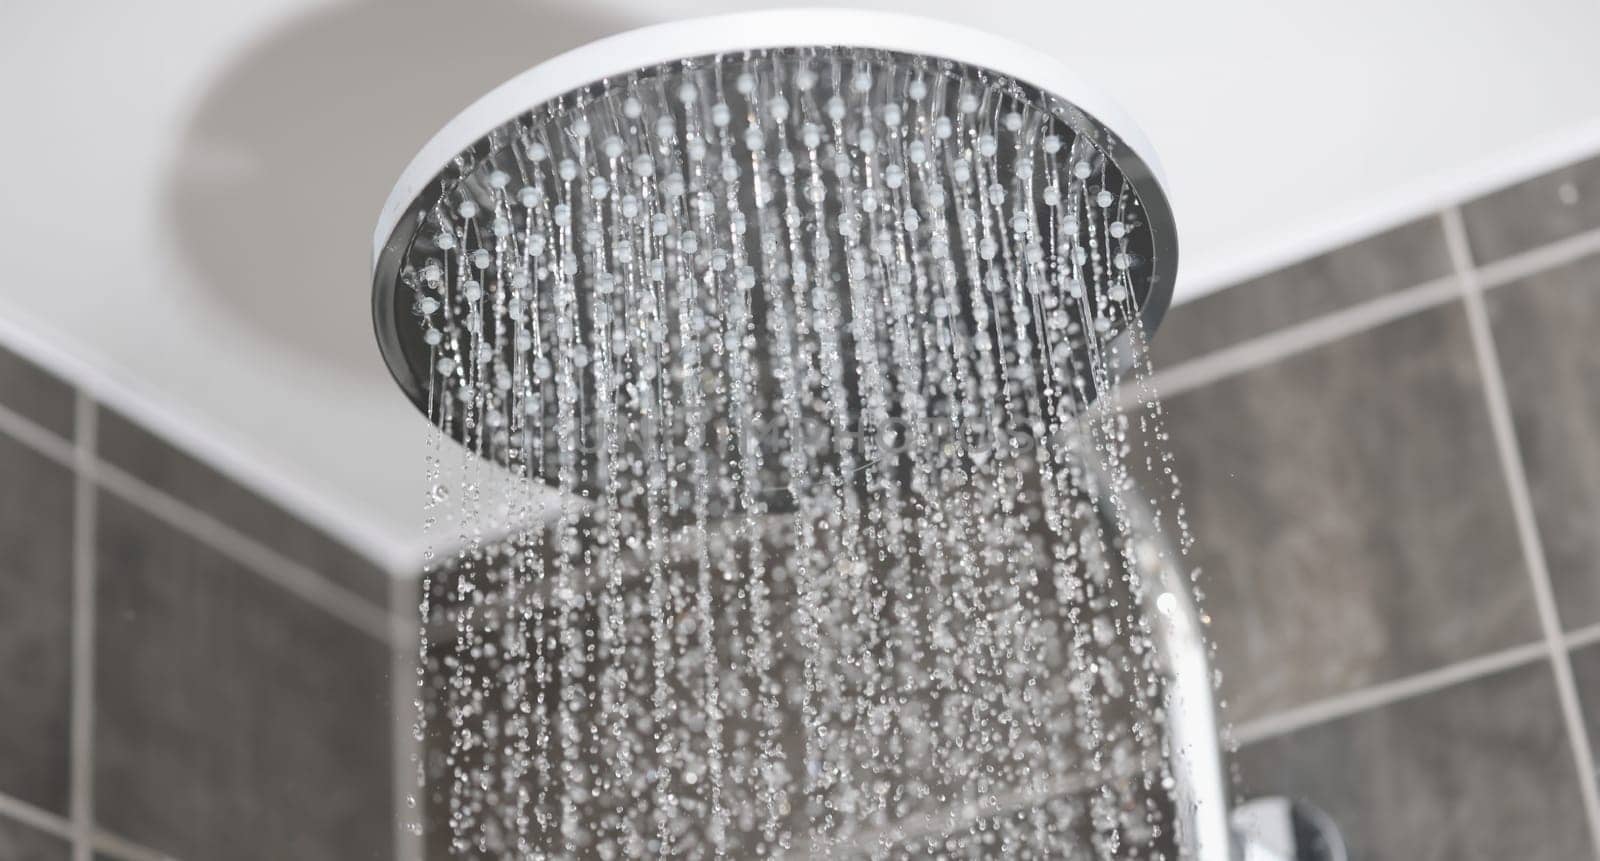 Close-up of water flows in small jets from metal rain shower in bathroom. Morning hygiene procedures concept.